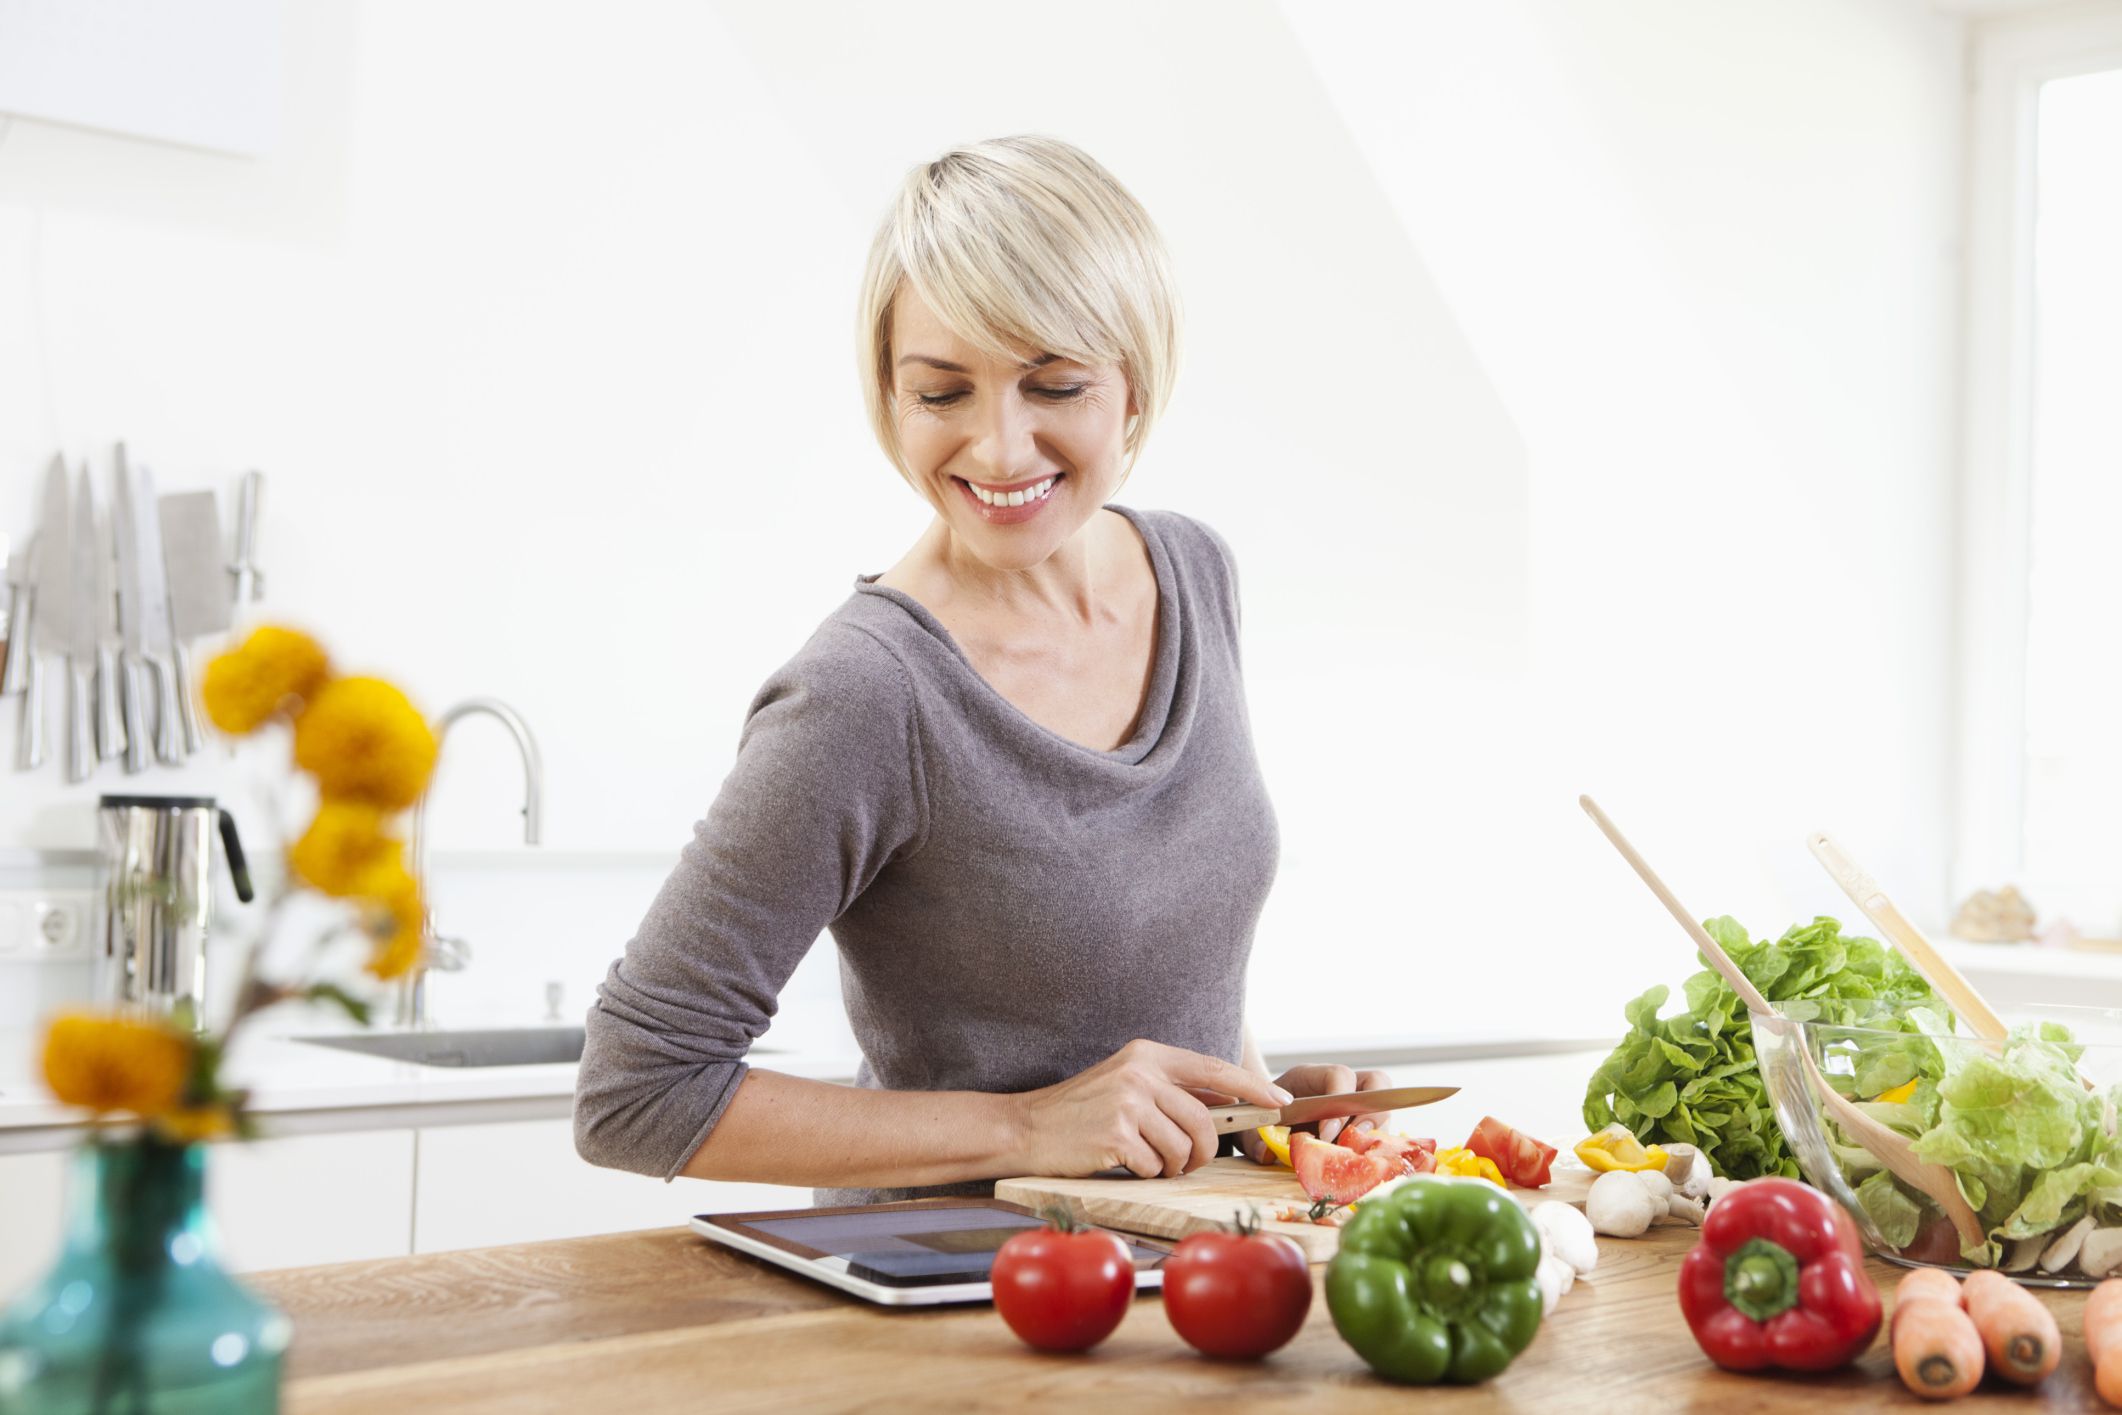 What Can You Eat on a Raw Food Diet?